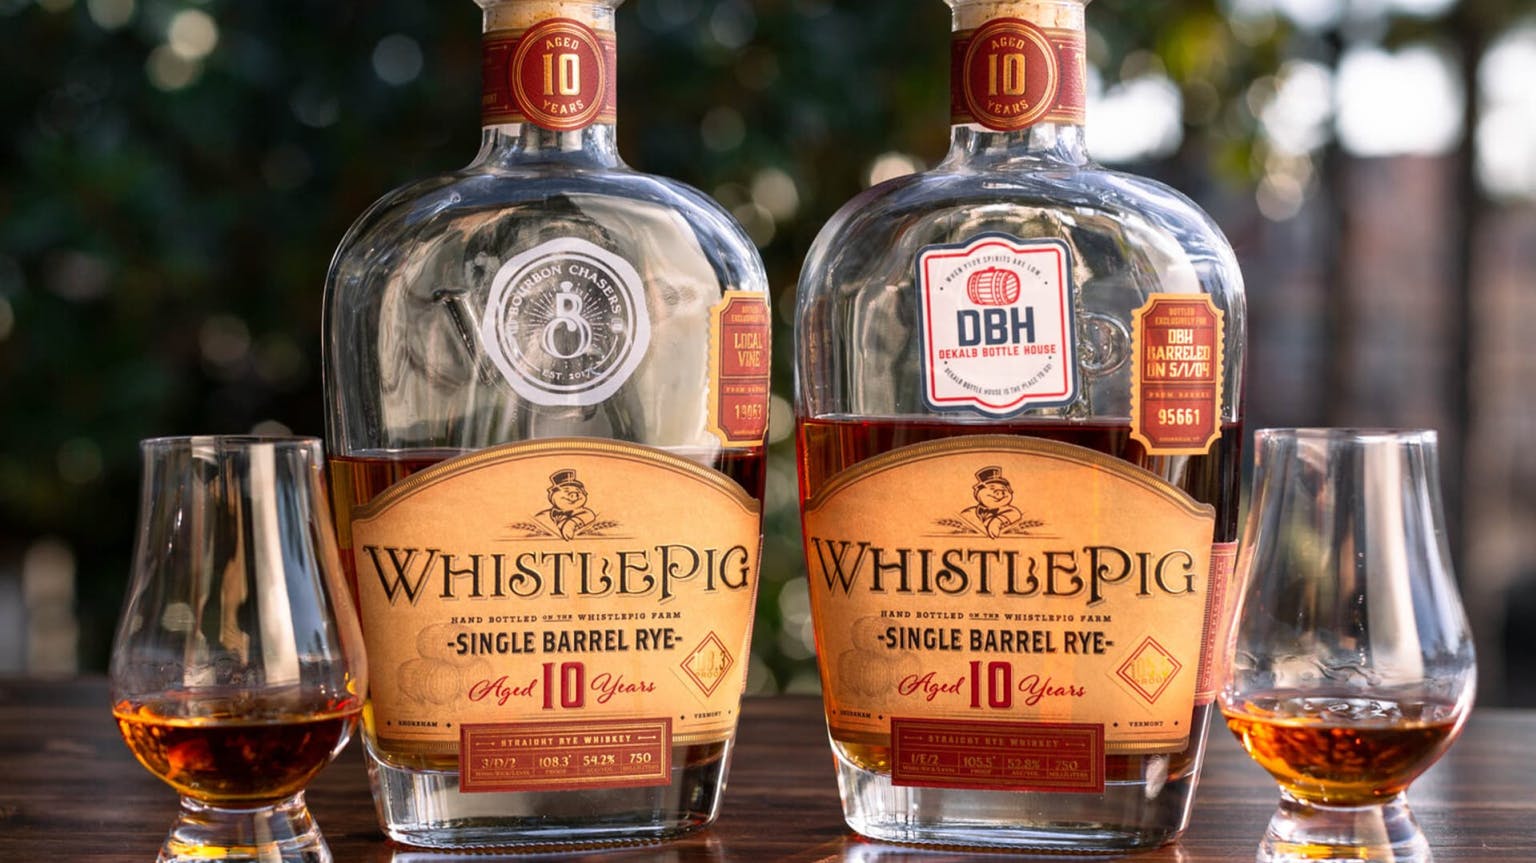 A Whistle-Stop Tour of WhistlePig